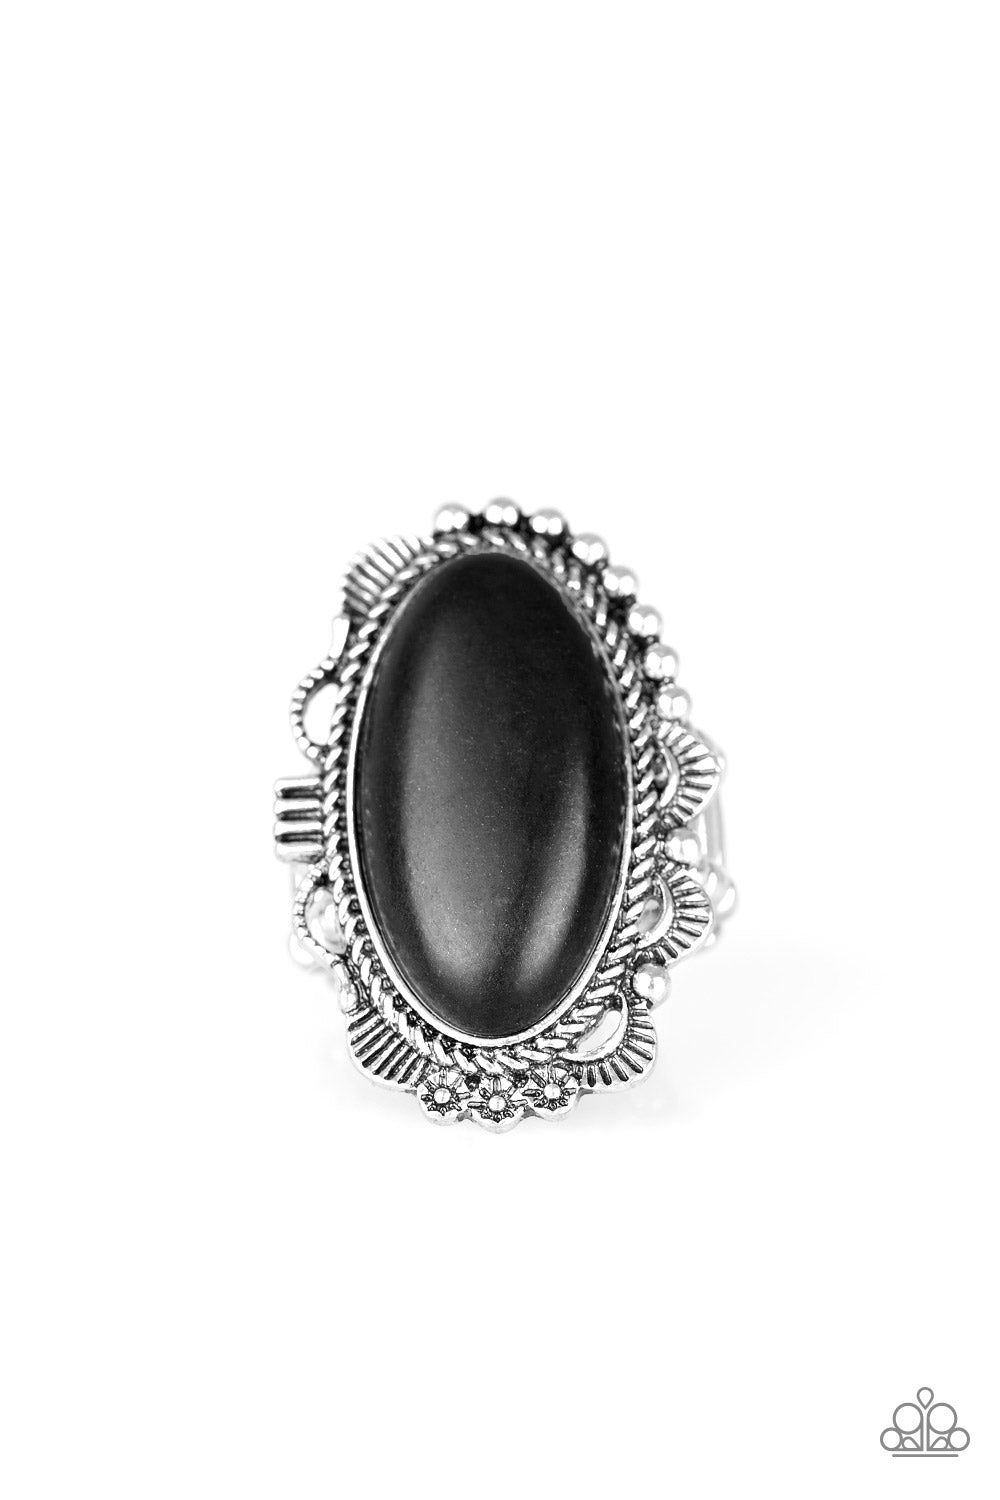 Open Range - Black and Silver Stone Ring - Paparazzi Accessories - An earthy black stone is pressed into an ornate silver frame rippling with studded and serrated textures for a seasonal flair. Features a stretchy band for a flexible fit. Sold as one individual ring.